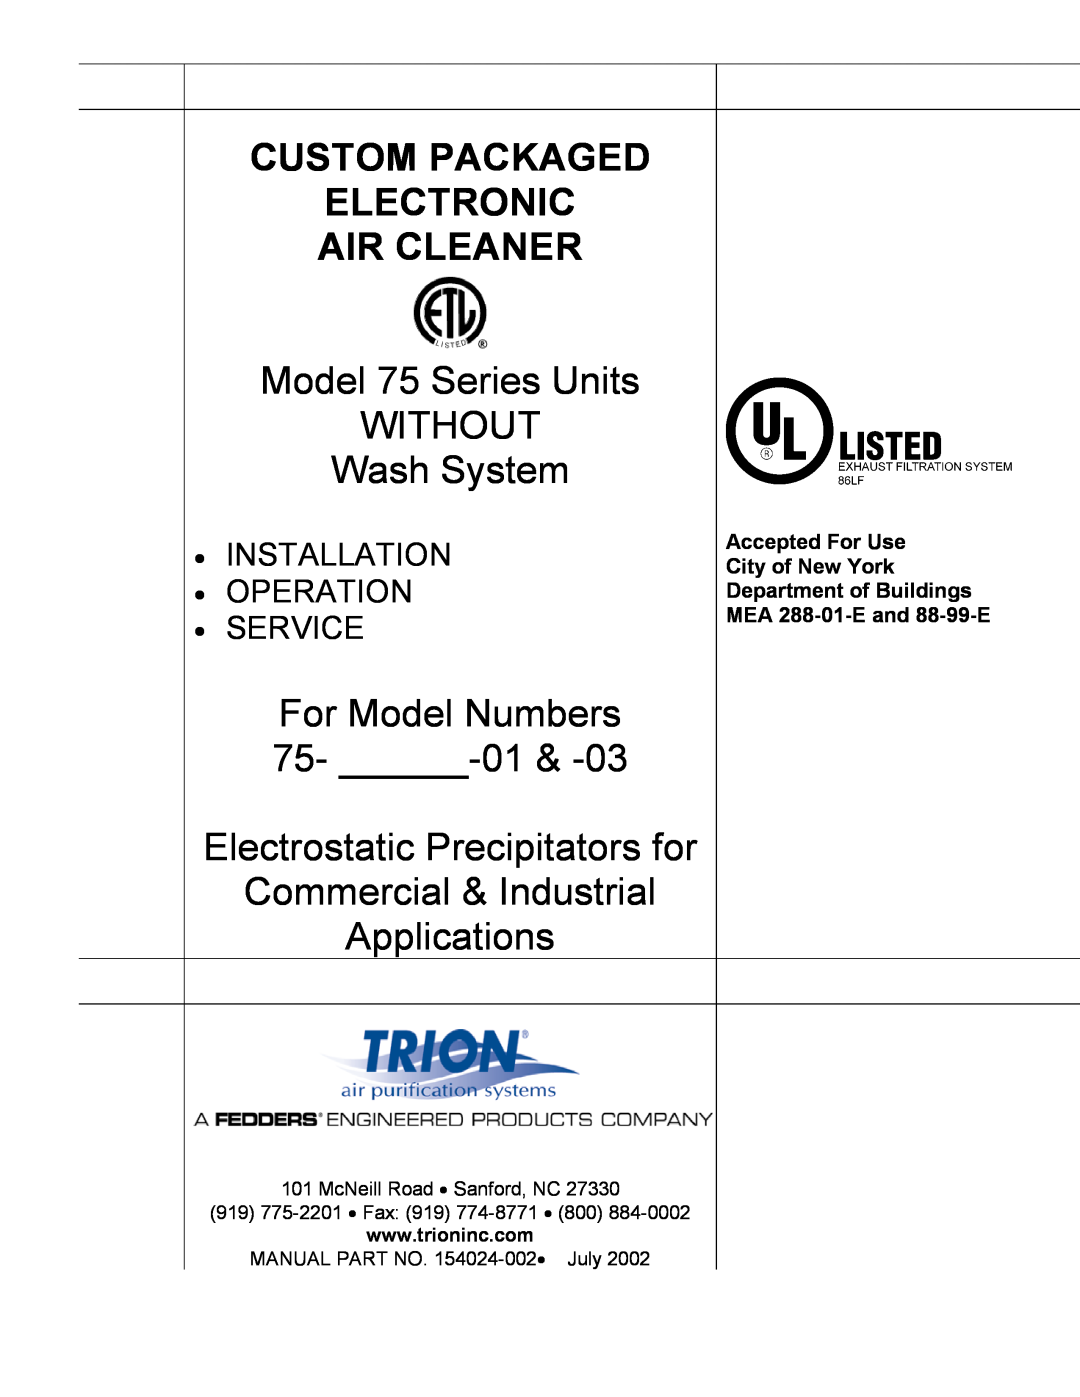 Duracell 75 manual Accepted For Use City of New York, Department of Buildings MEA 288-01-Eand 88-99-E, For Model Numbers 